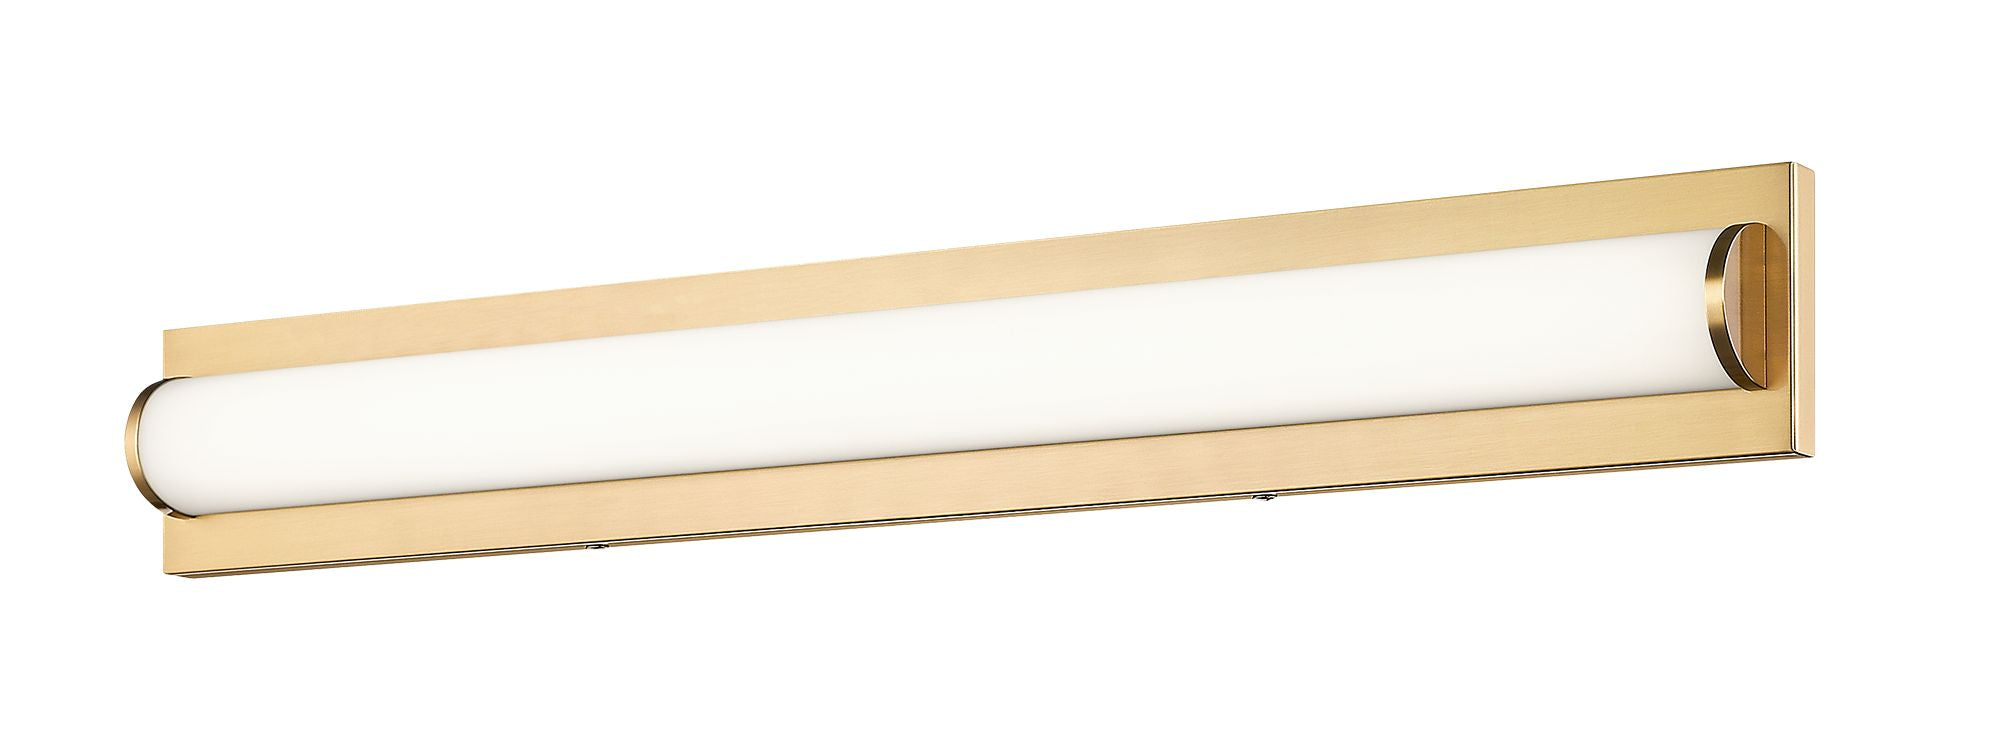 PSYRA Bathroom wall sconce Gold INTEGRATED LED - S08934AG | MATTEO